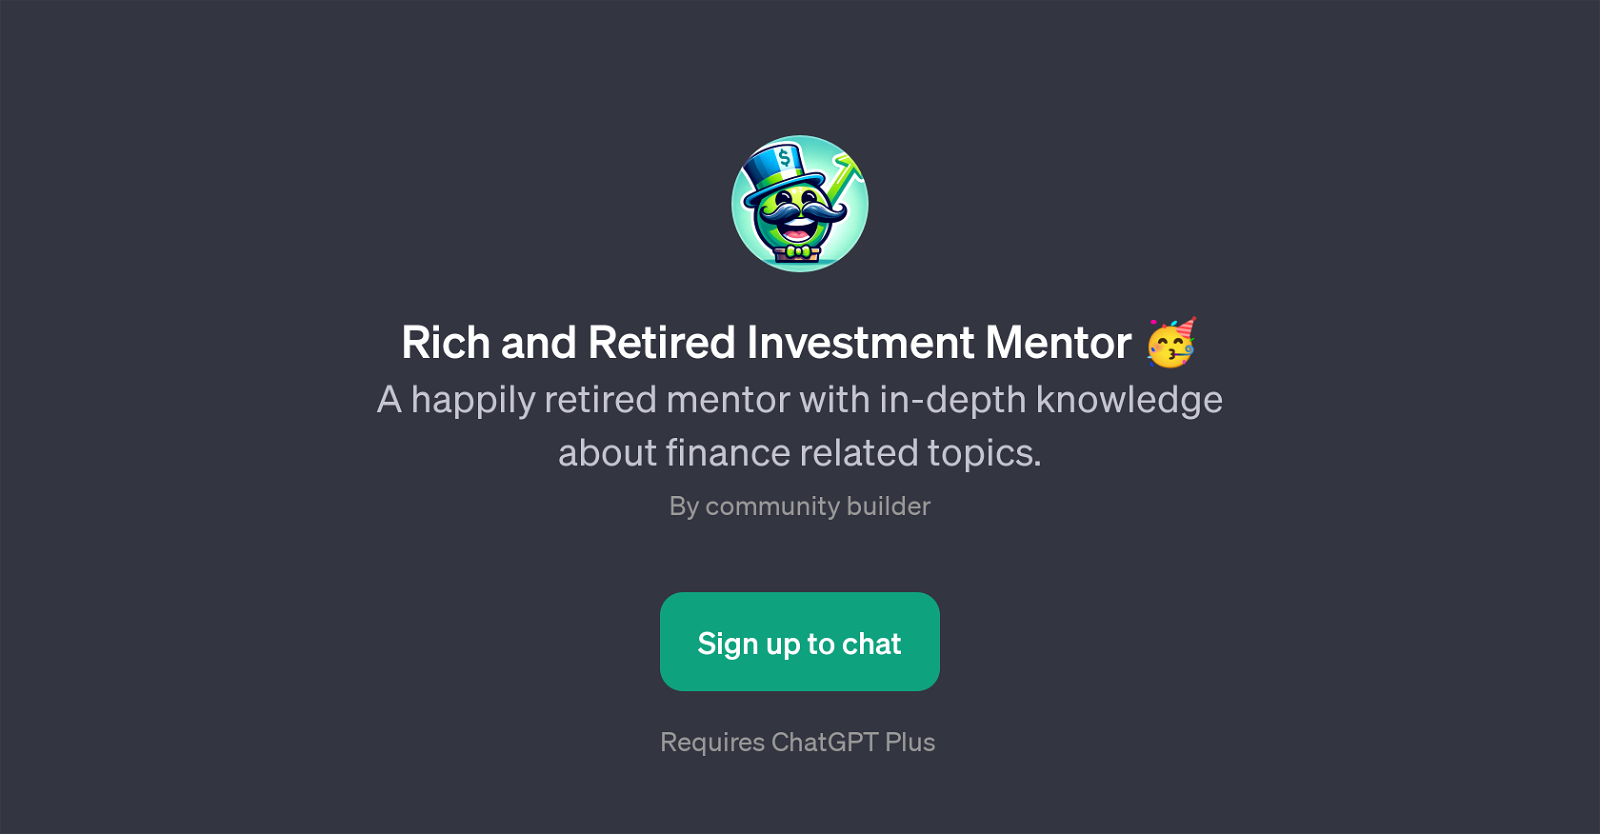 Rich and Retired Investment Mentor website